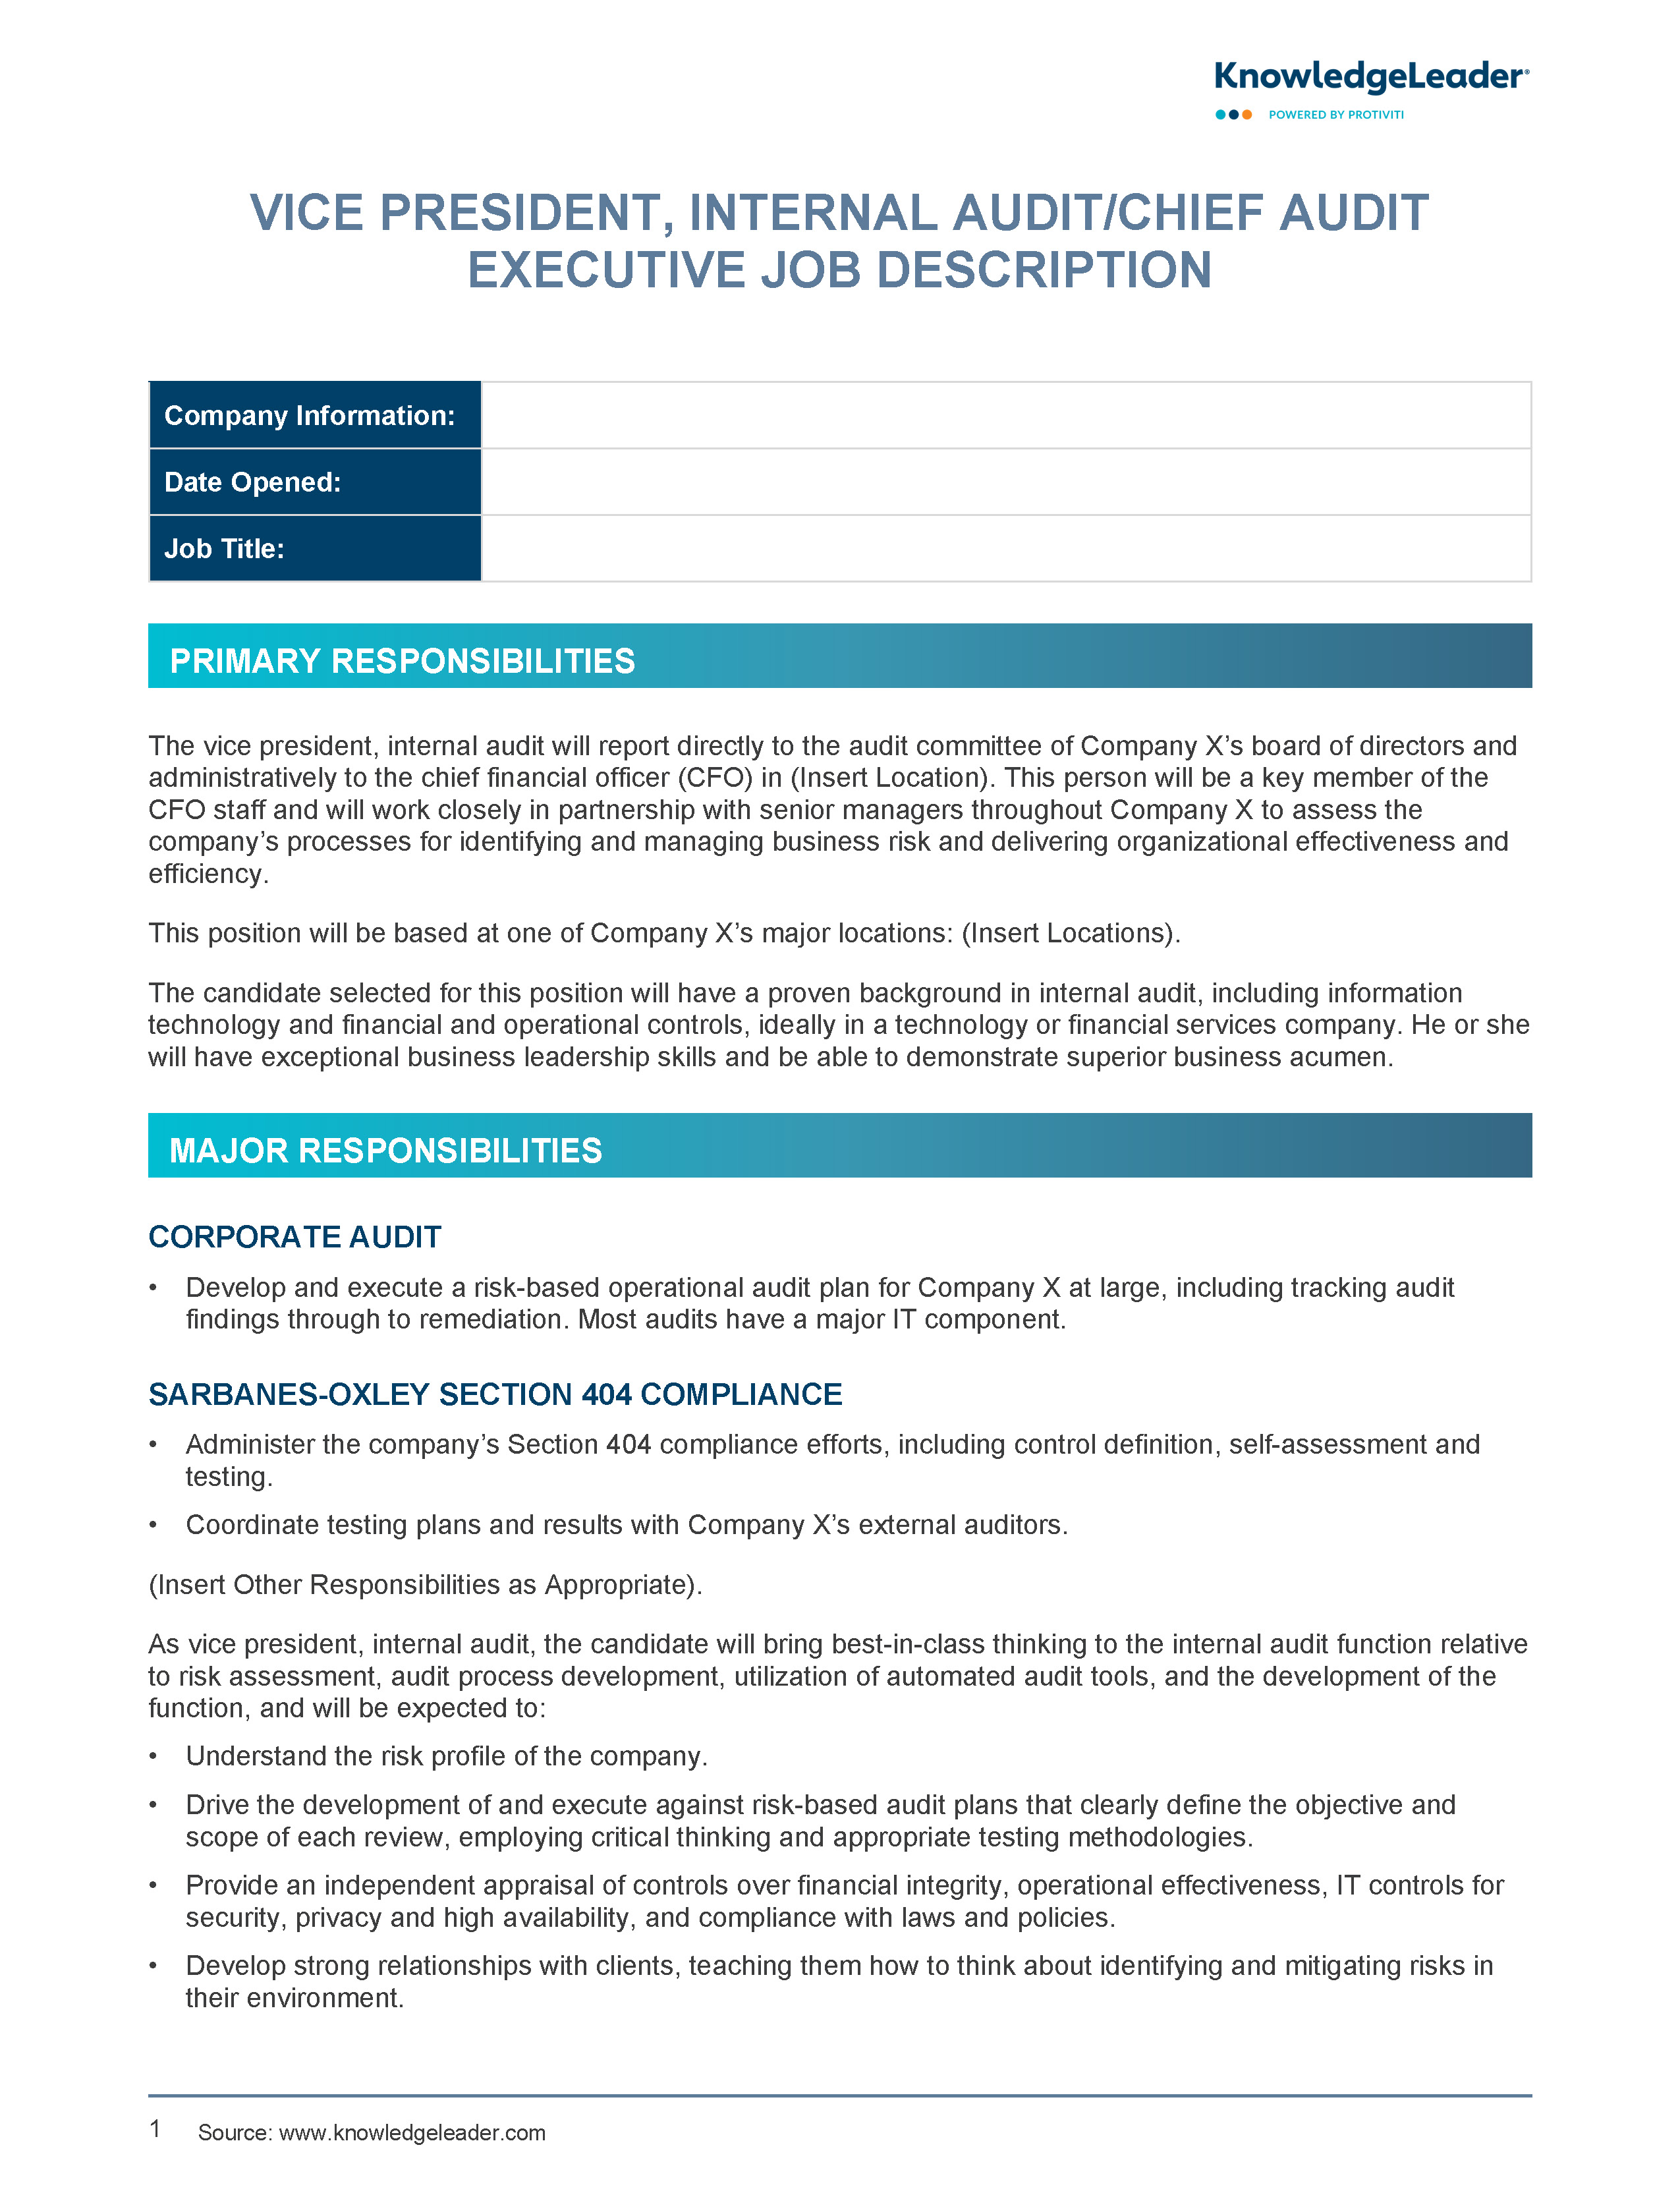 Screenshot of the first page of Vice President Internal Audit Chief Audit Executive Job Description